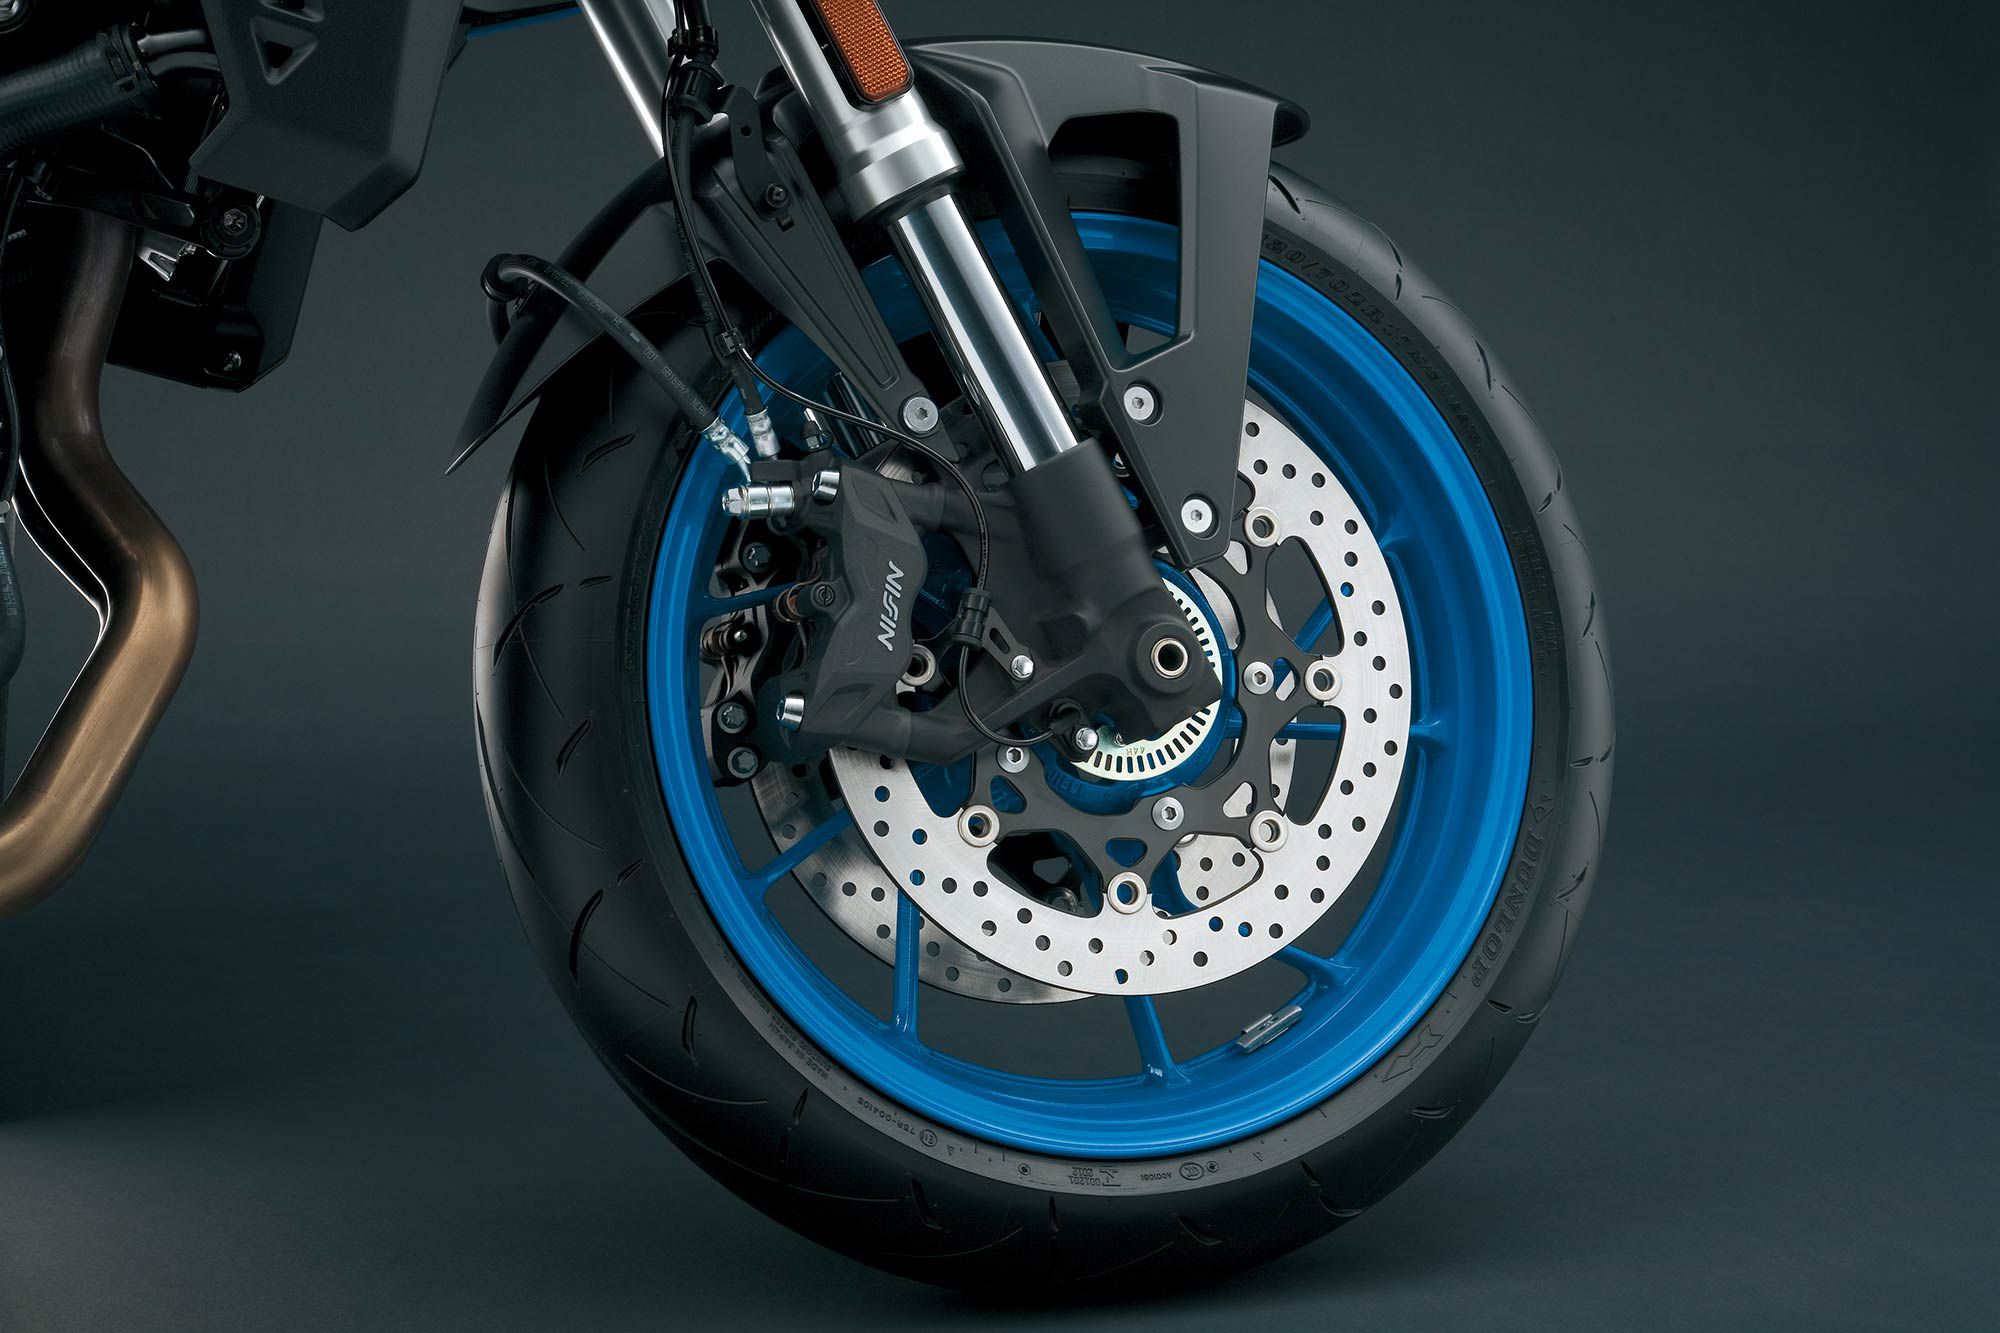 Nissin brakes are used front and rear, with four-piston front caliper biting on 310mm discs.